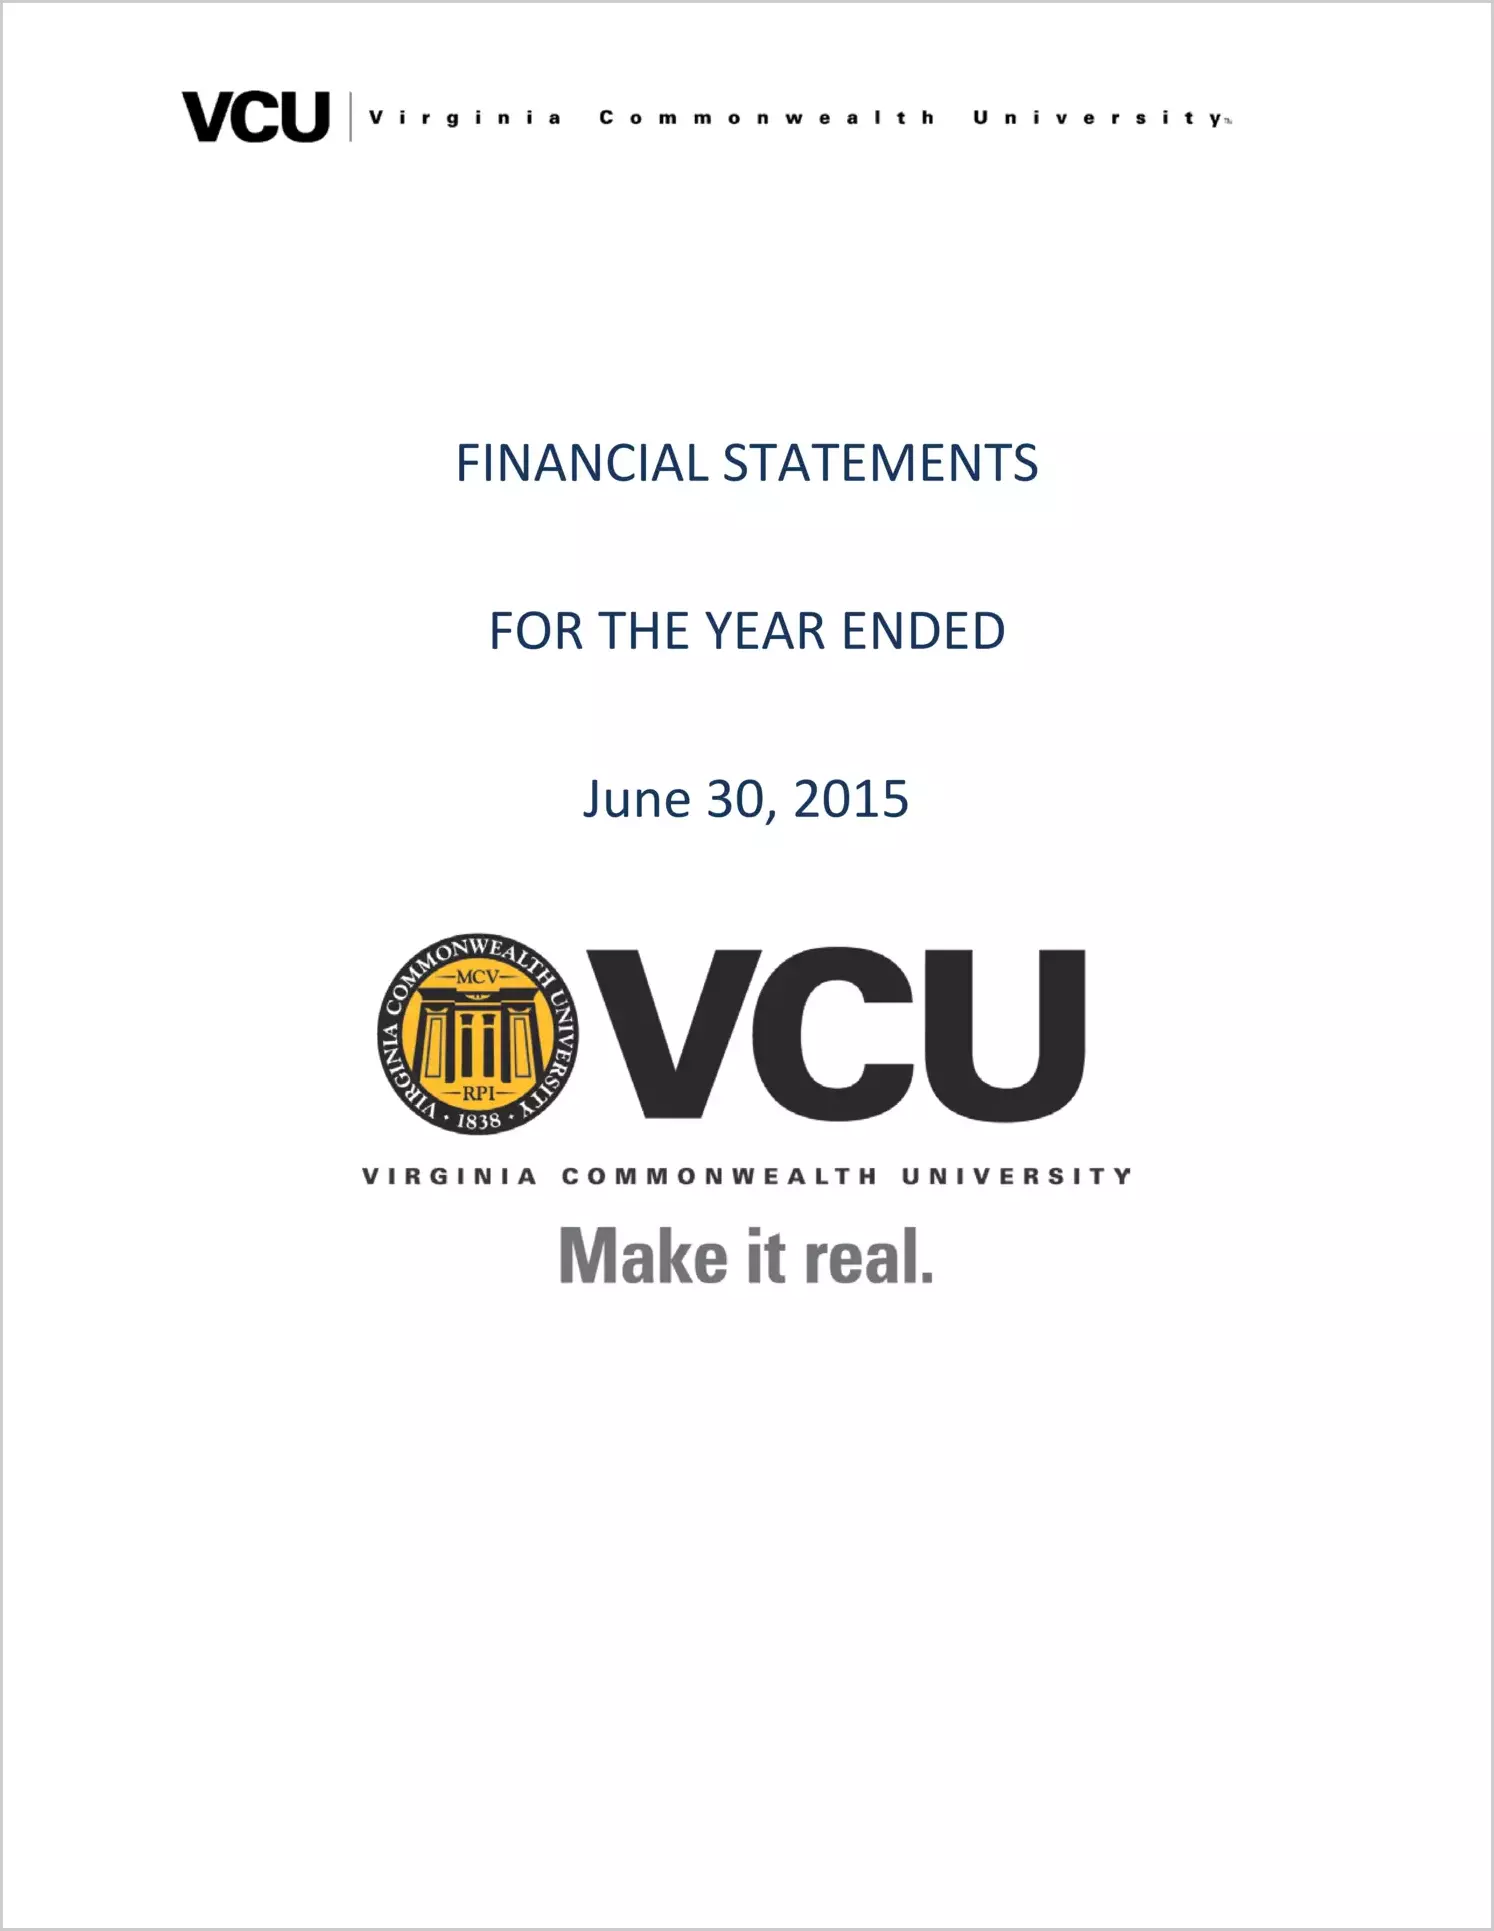 Virginia Commonwealth University Finanical Statements Report for the year ended June 30, 2015